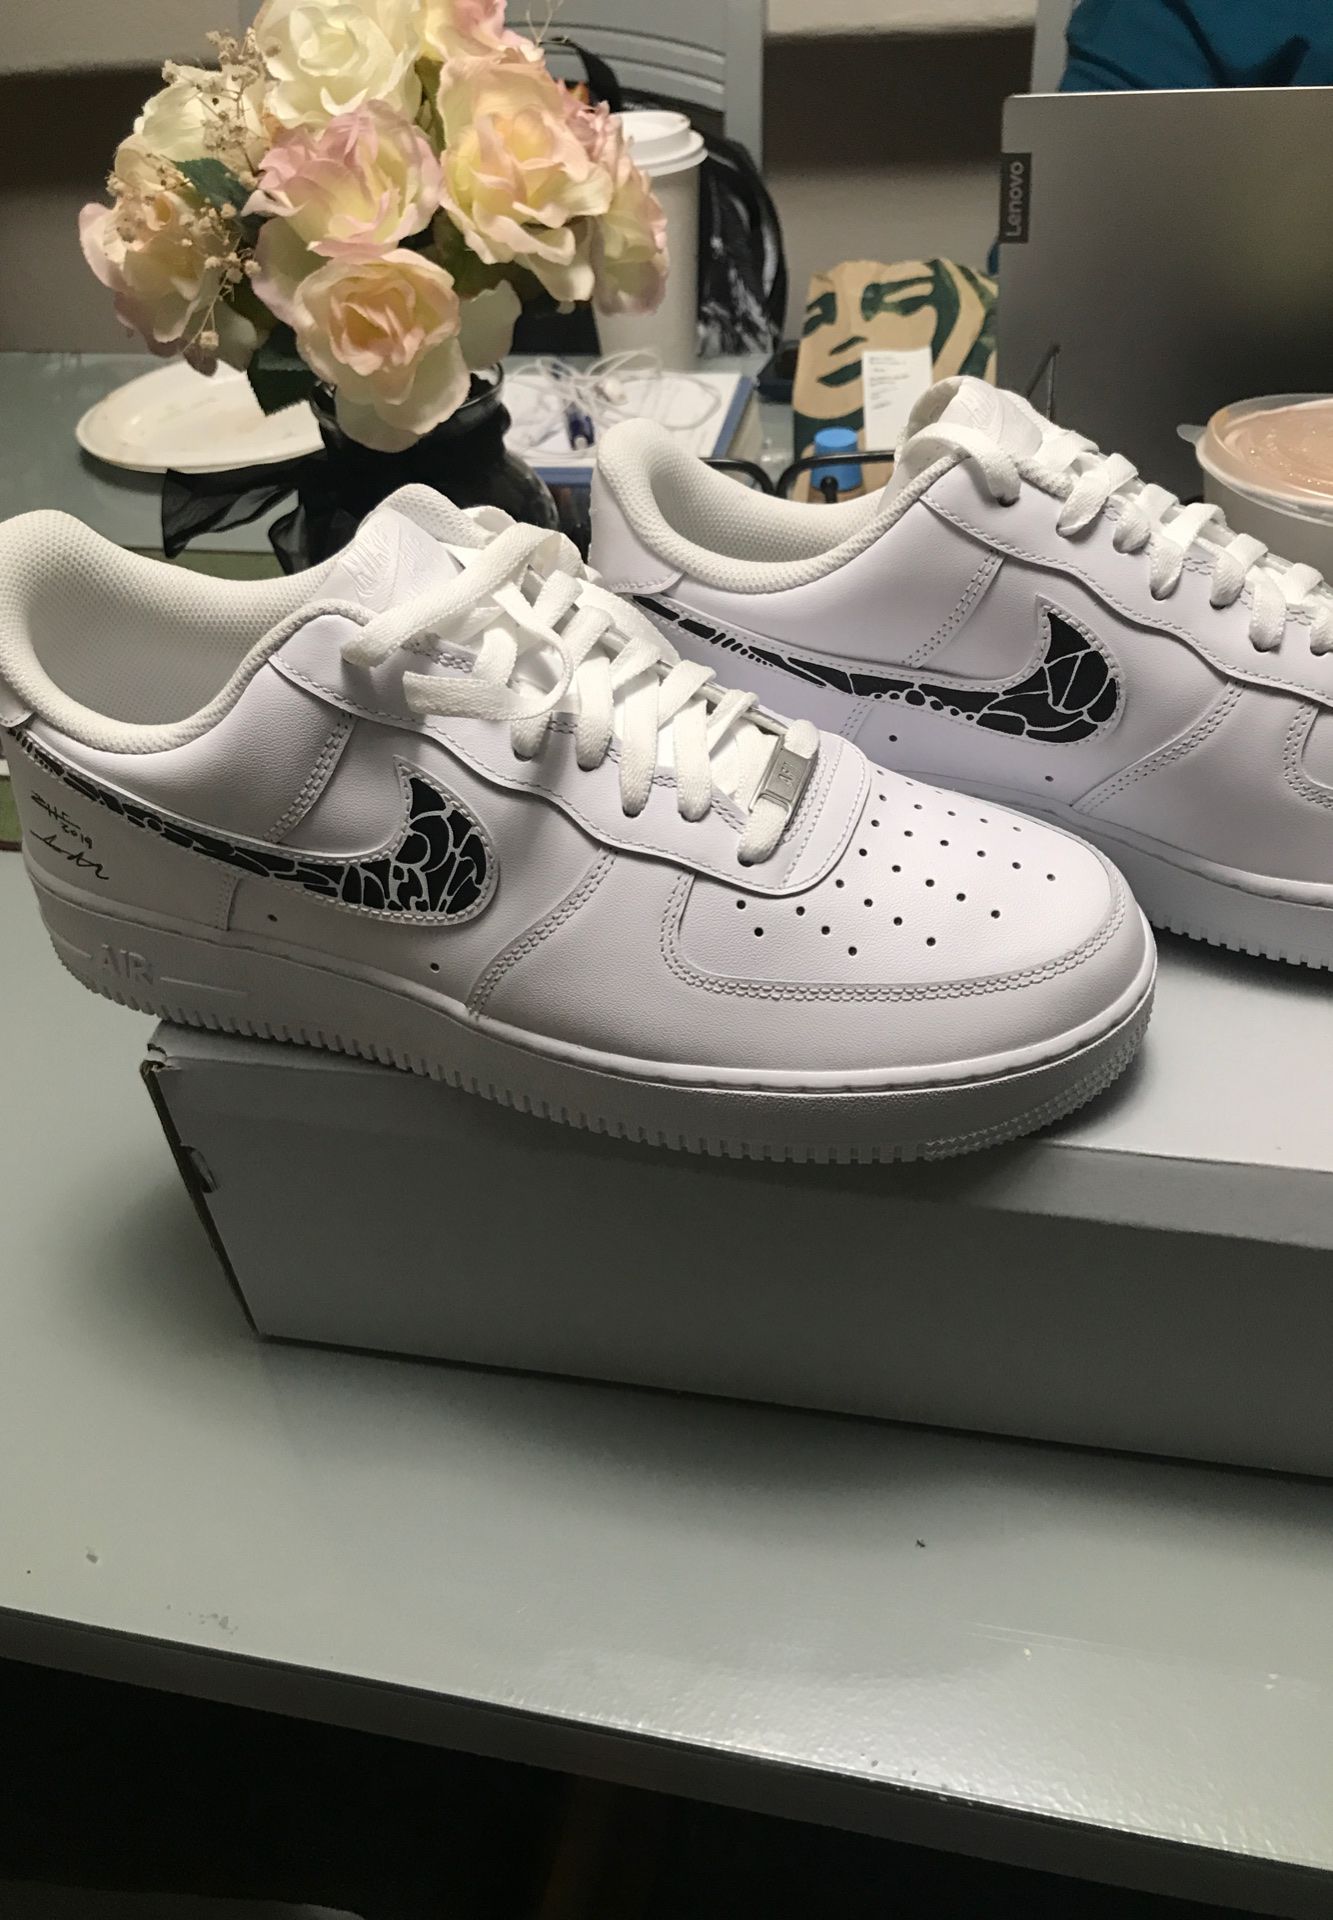 Nike Air Force 1 ‘07 signed by YouTuber ZHC.